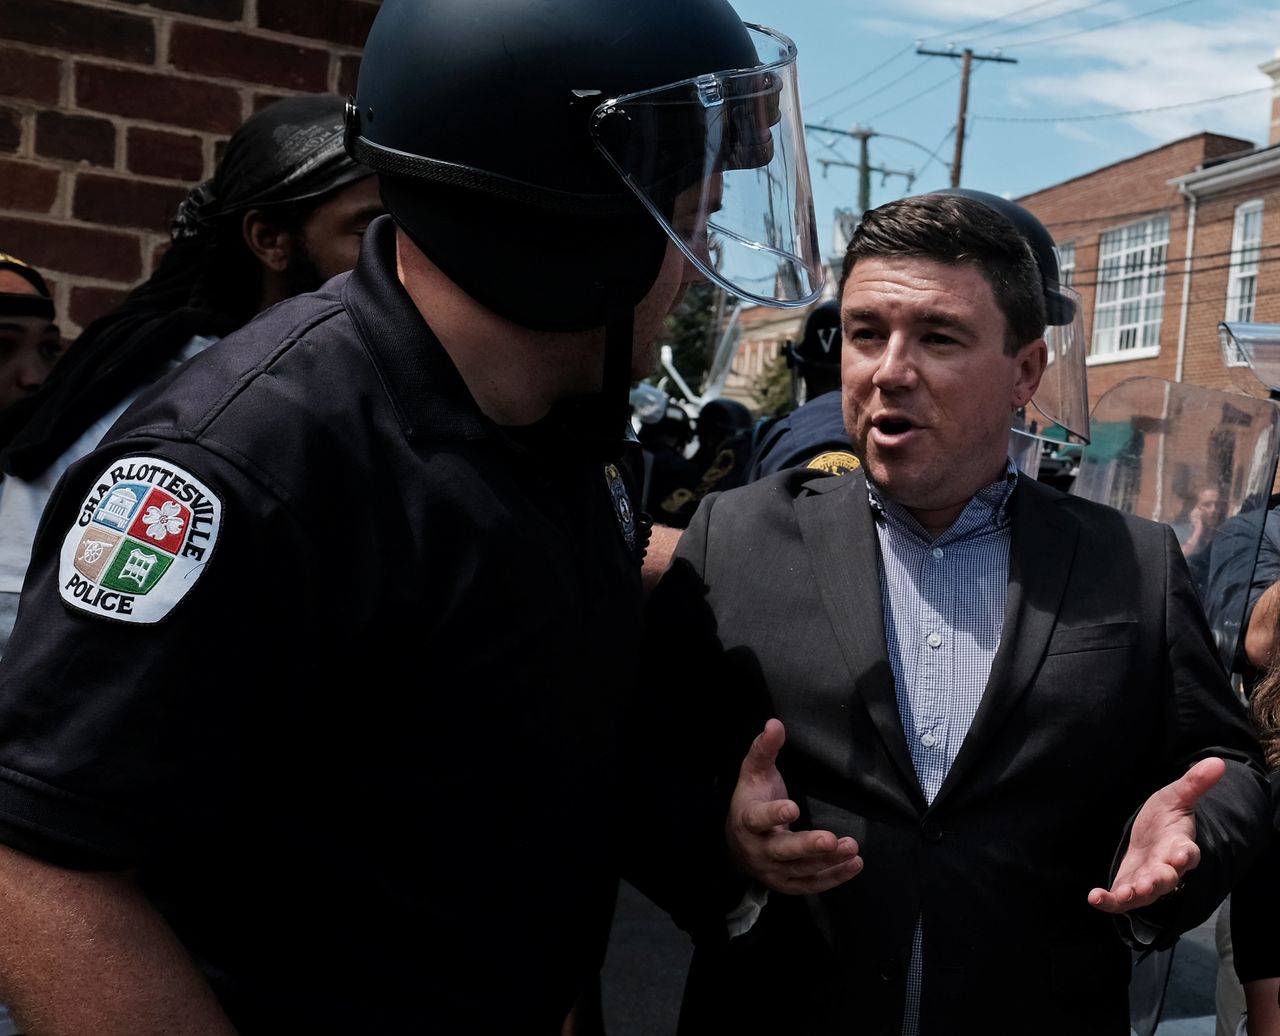 Unite The Right rally organizer Jason Kessler is escorted by police after he attempted to speak at a press conference in front of Charlottesville City Hall in Charlottesville, Virginia, August 13, 2017. 